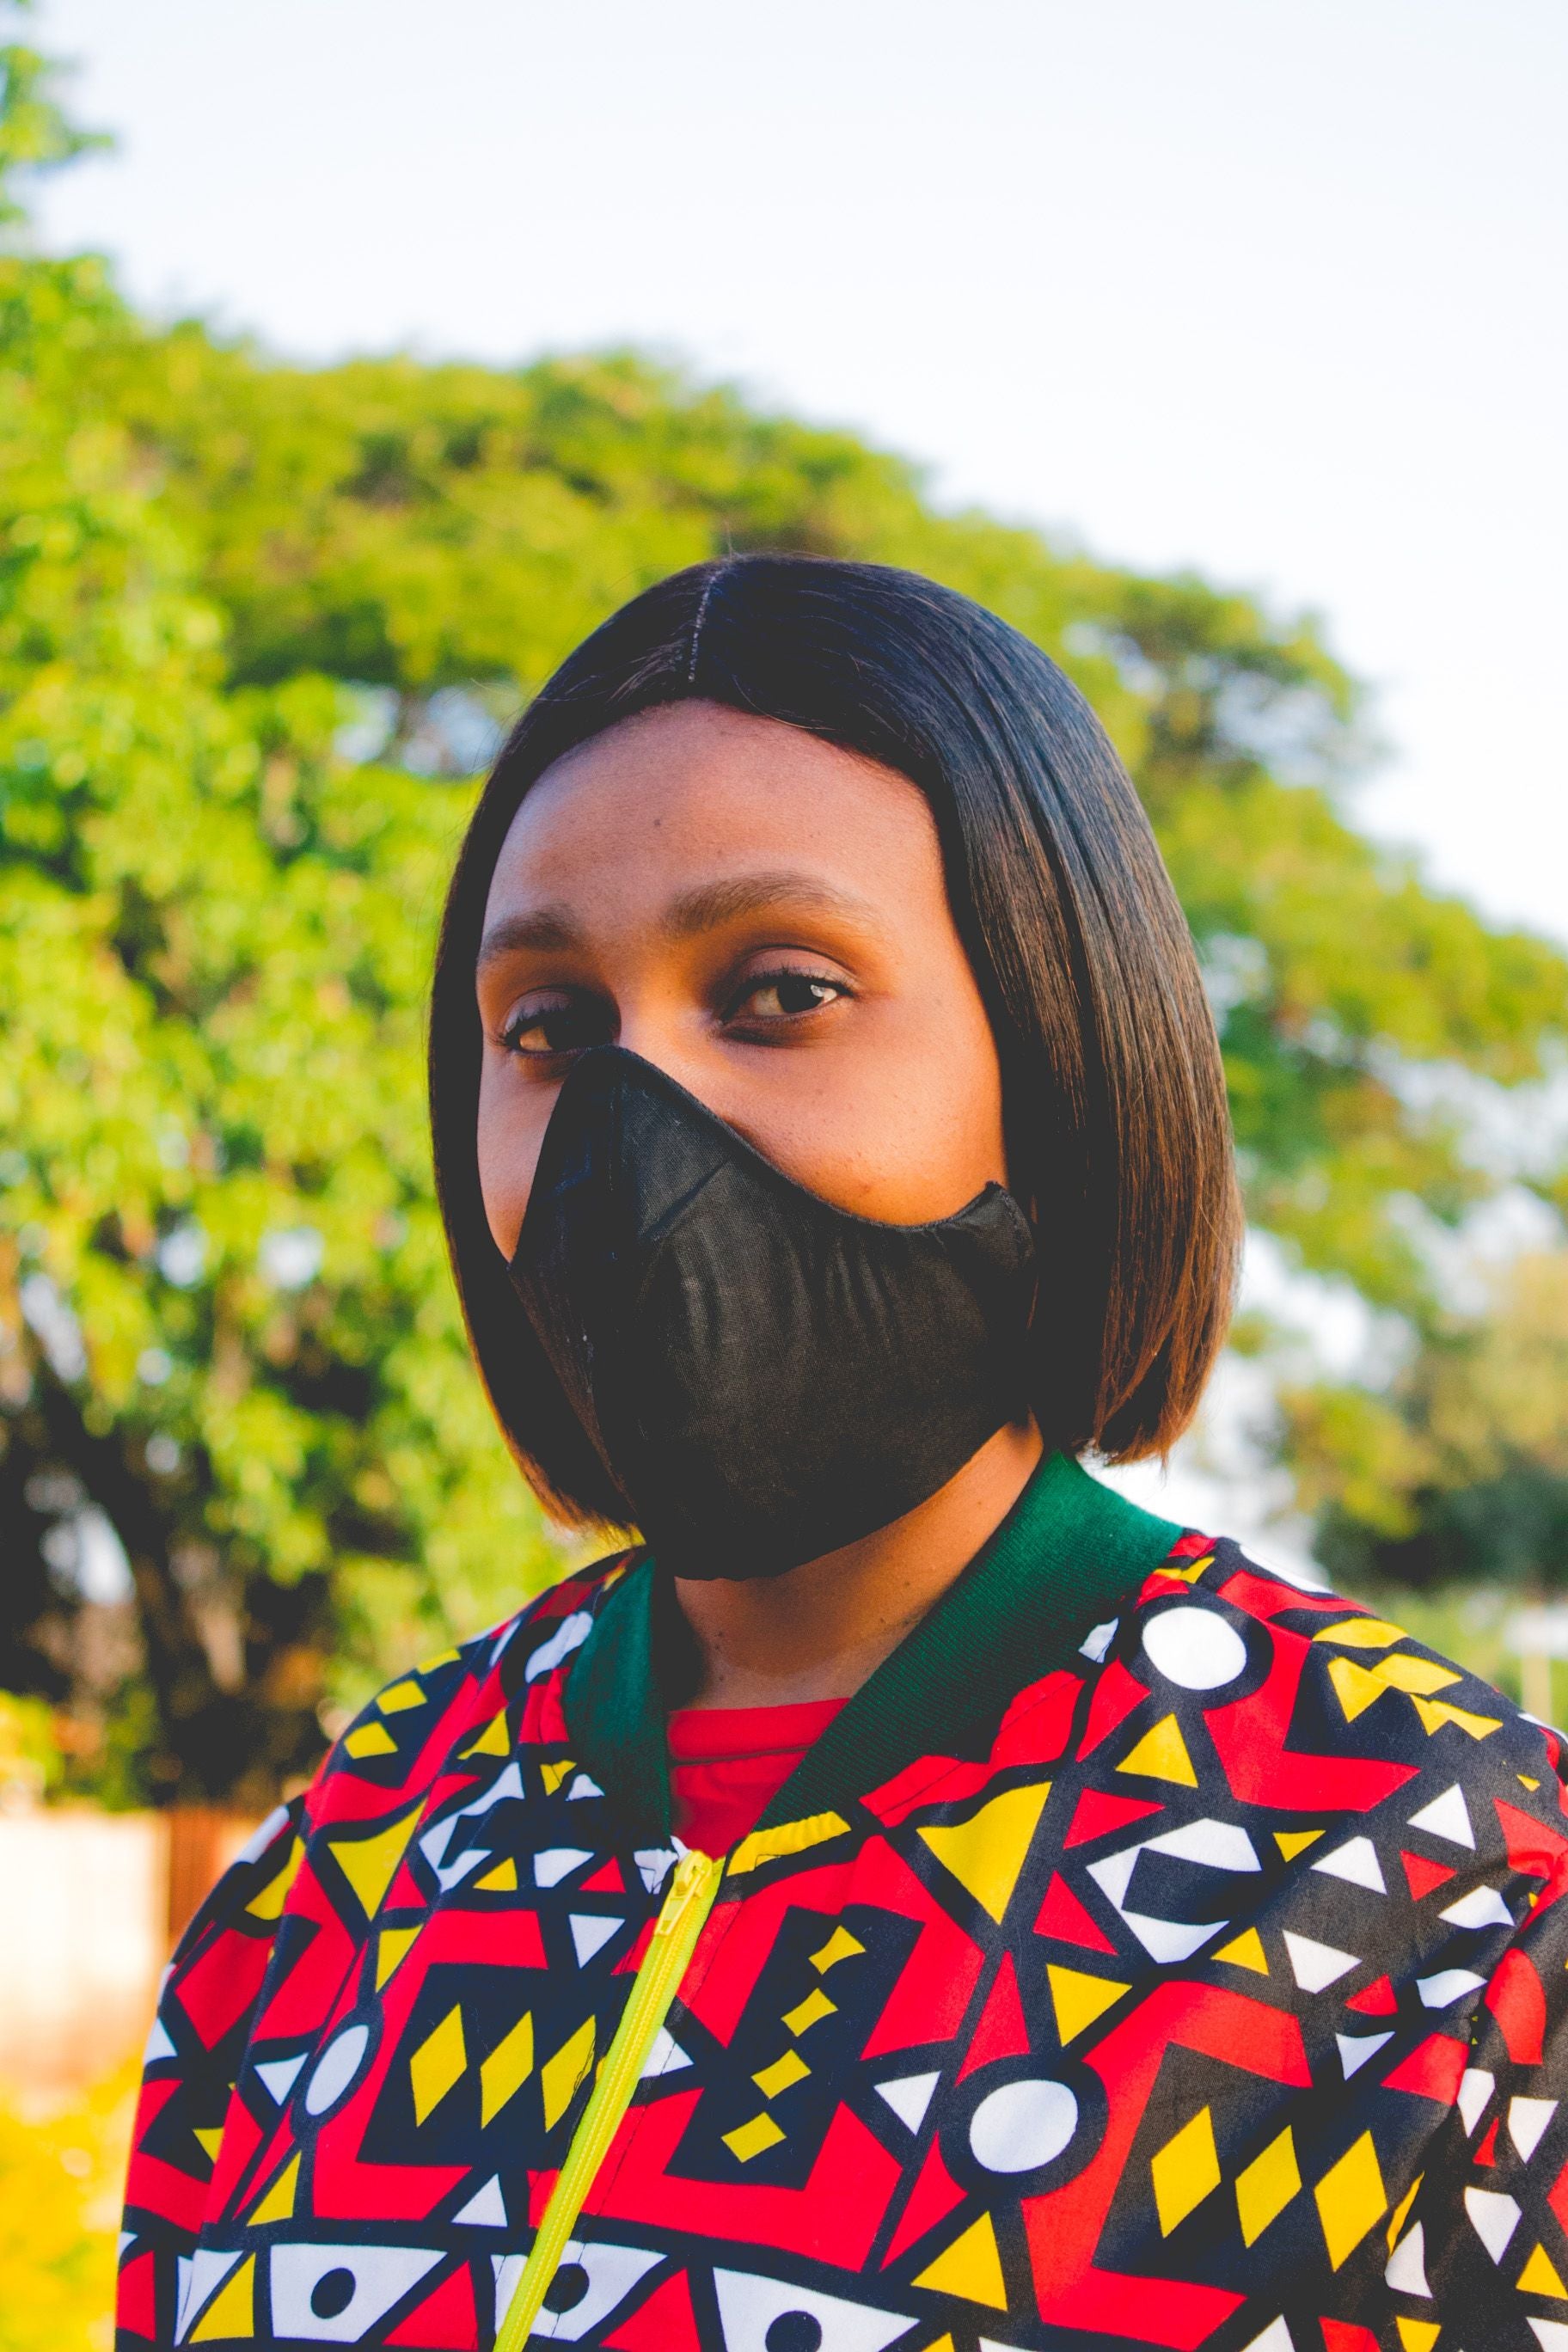 Plain Black Face Mask -with strings that tie around head, No elastic (Adults) (3-Ply Only) Tribe Afrique